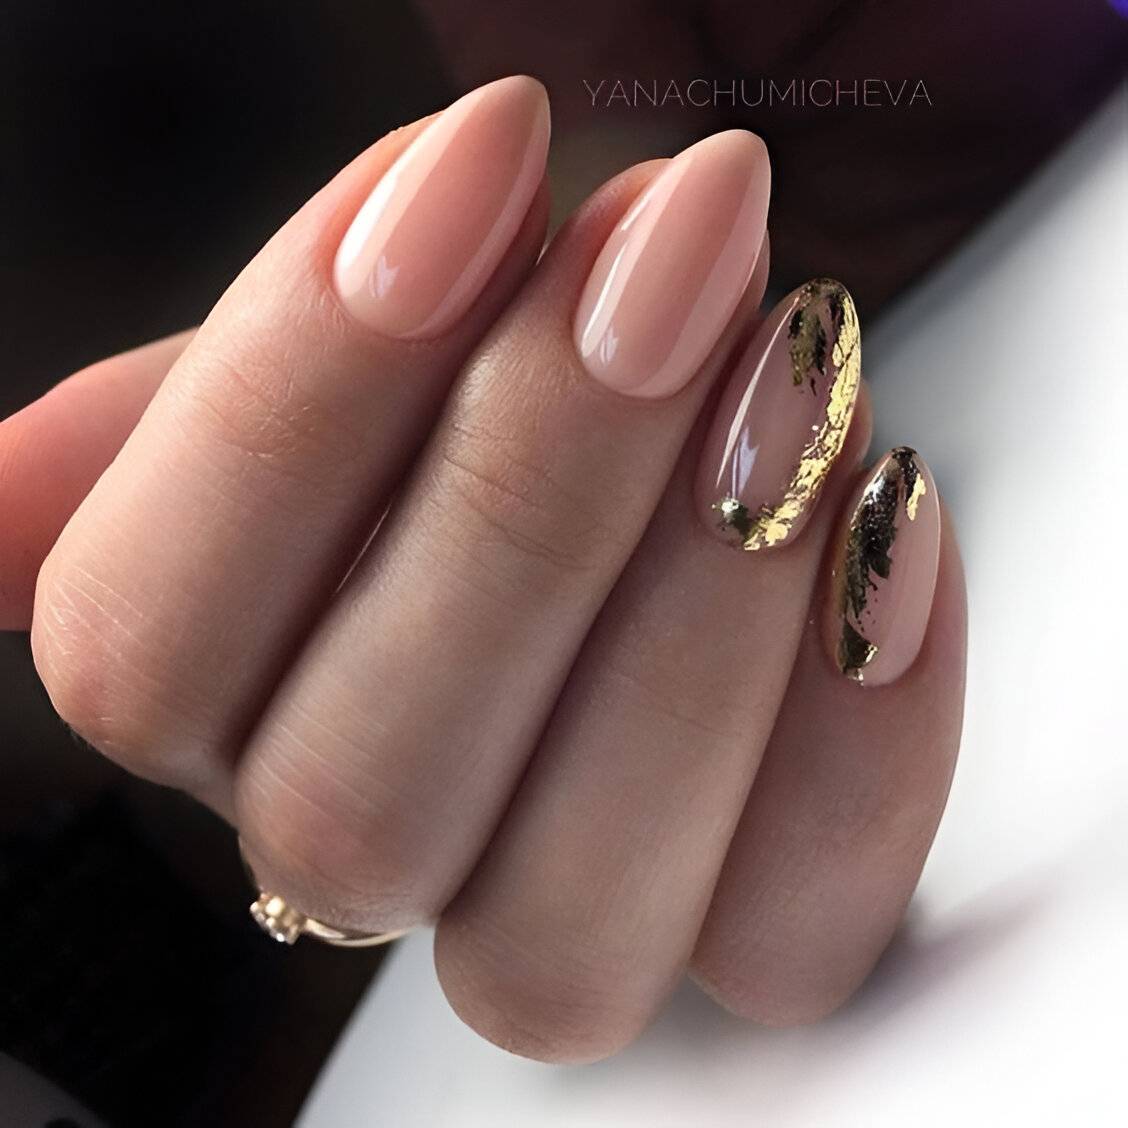 30 Drool-Worthy Short Almond Nail Ideas Every Chic Lady Needs - 215